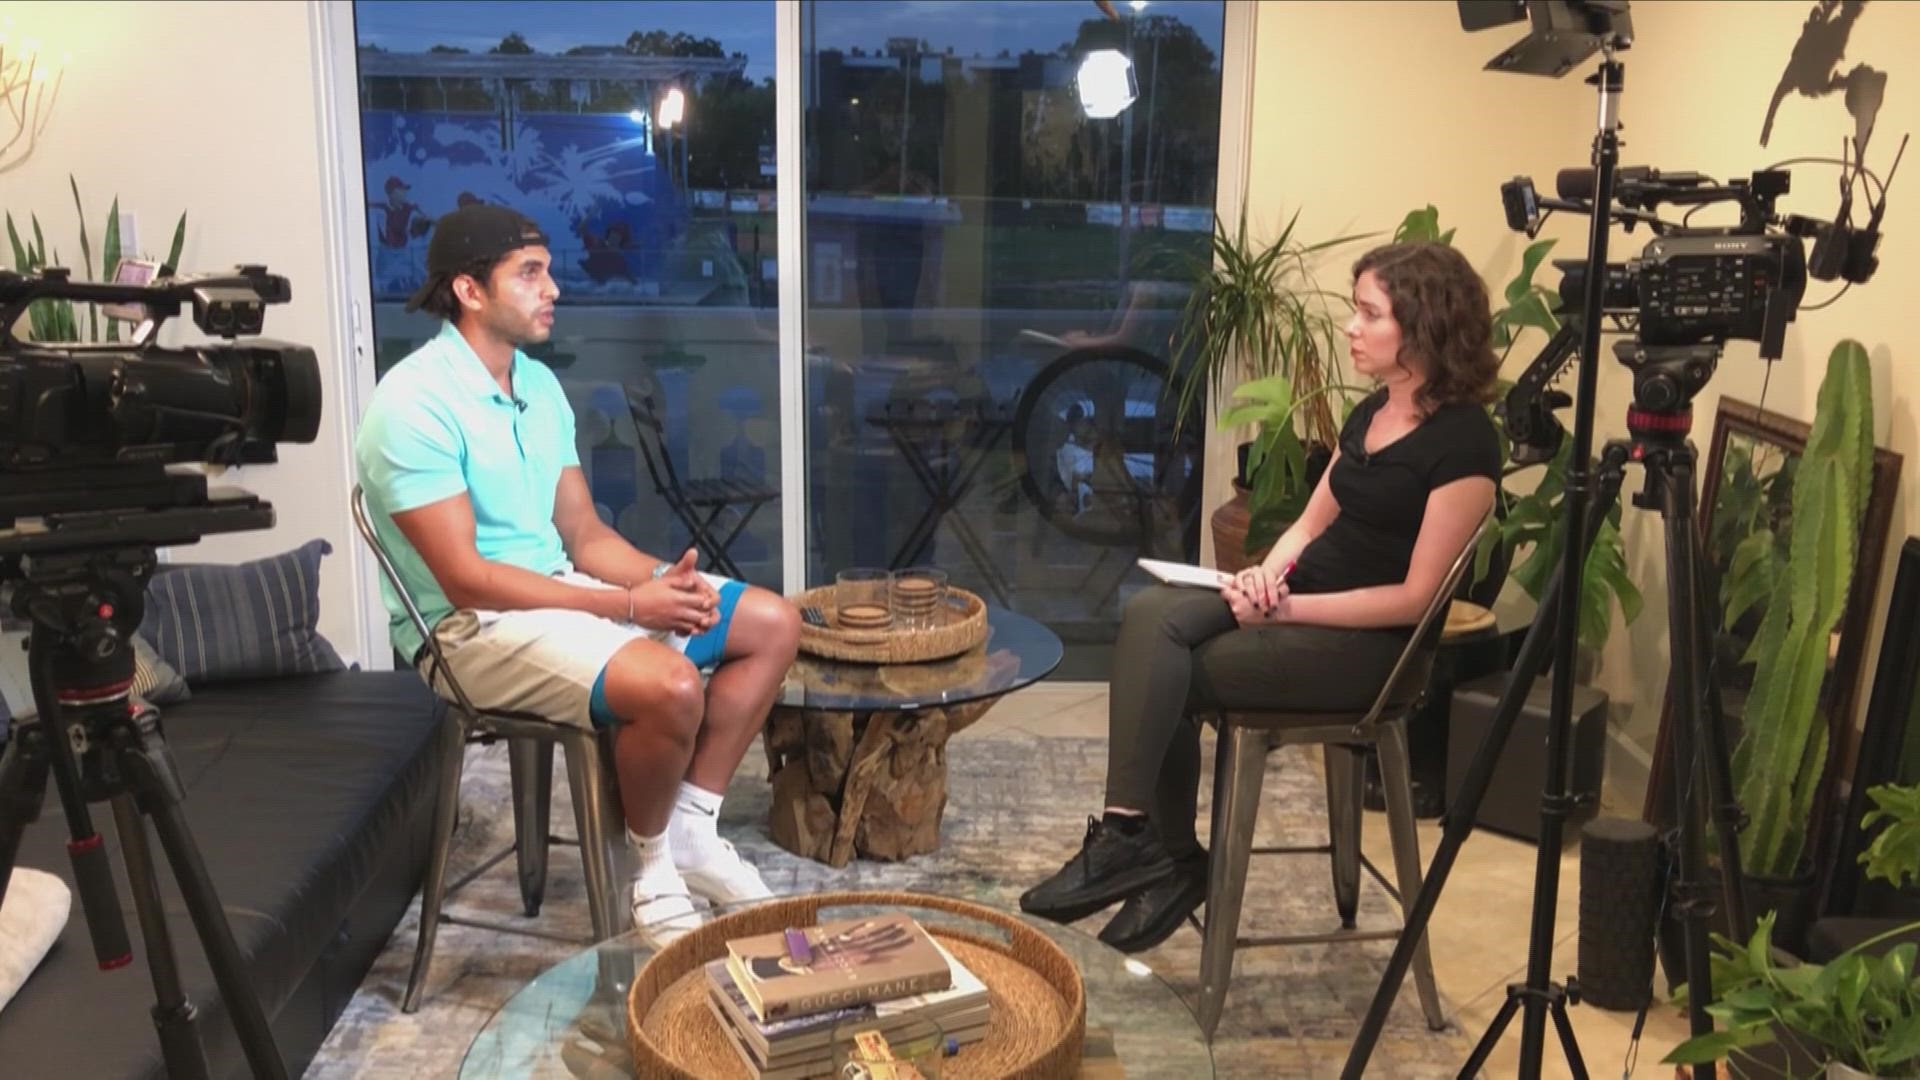 This is an extended cut of 10 Tampa Bay investigative reporter Jenna Bourne’s exclusive interview with Nour Elsayed.